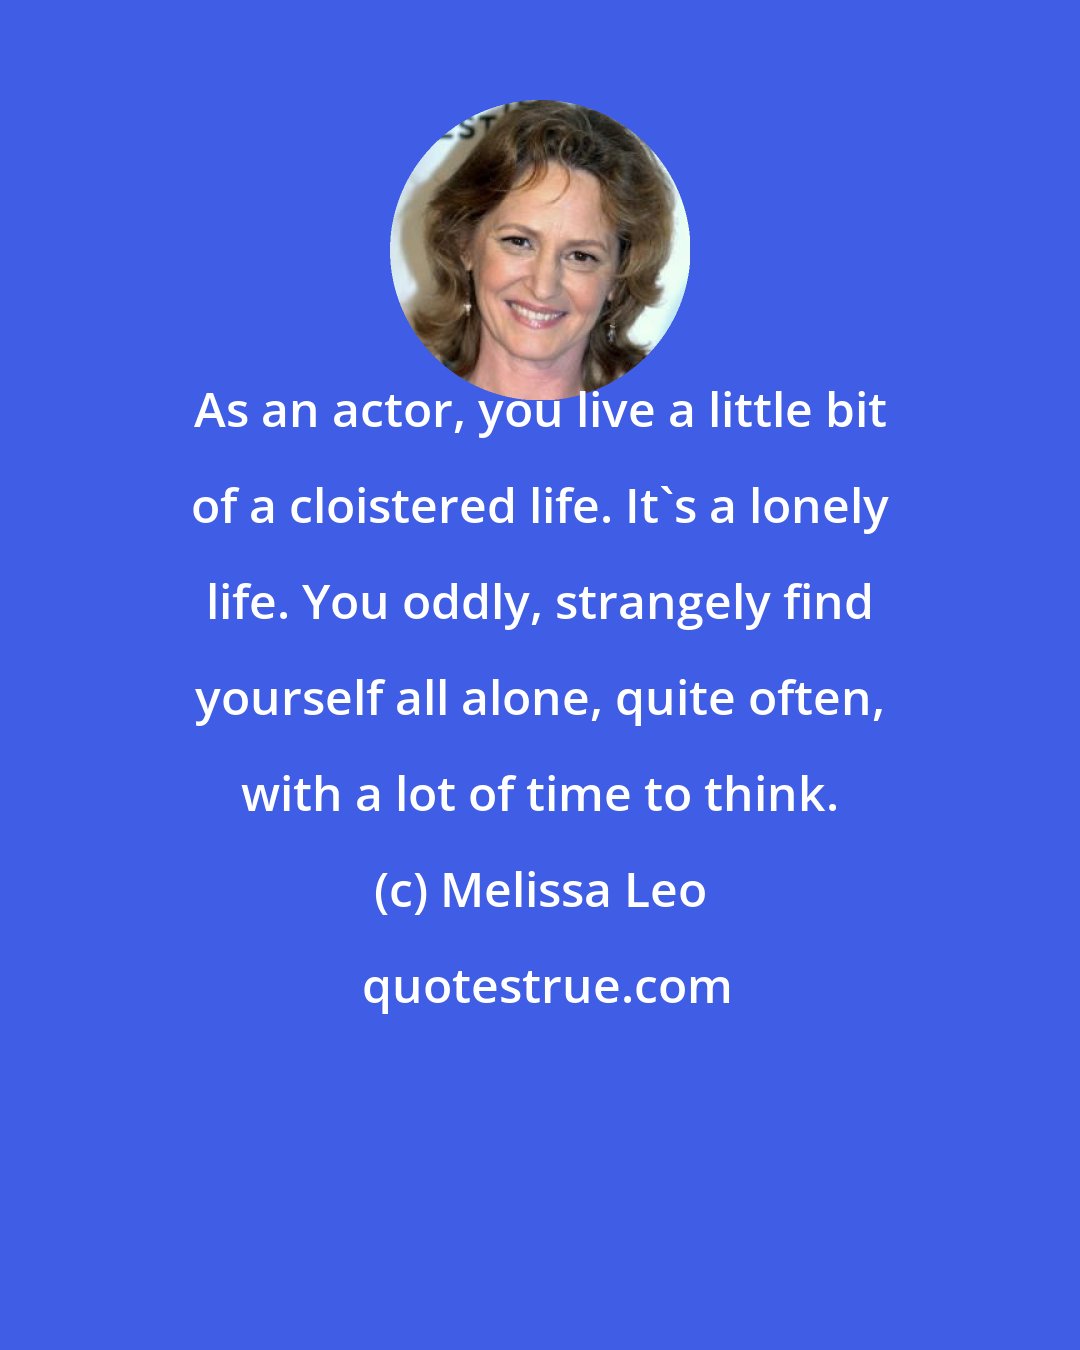 Melissa Leo: As an actor, you live a little bit of a cloistered life. It's a lonely life. You oddly, strangely find yourself all alone, quite often, with a lot of time to think.